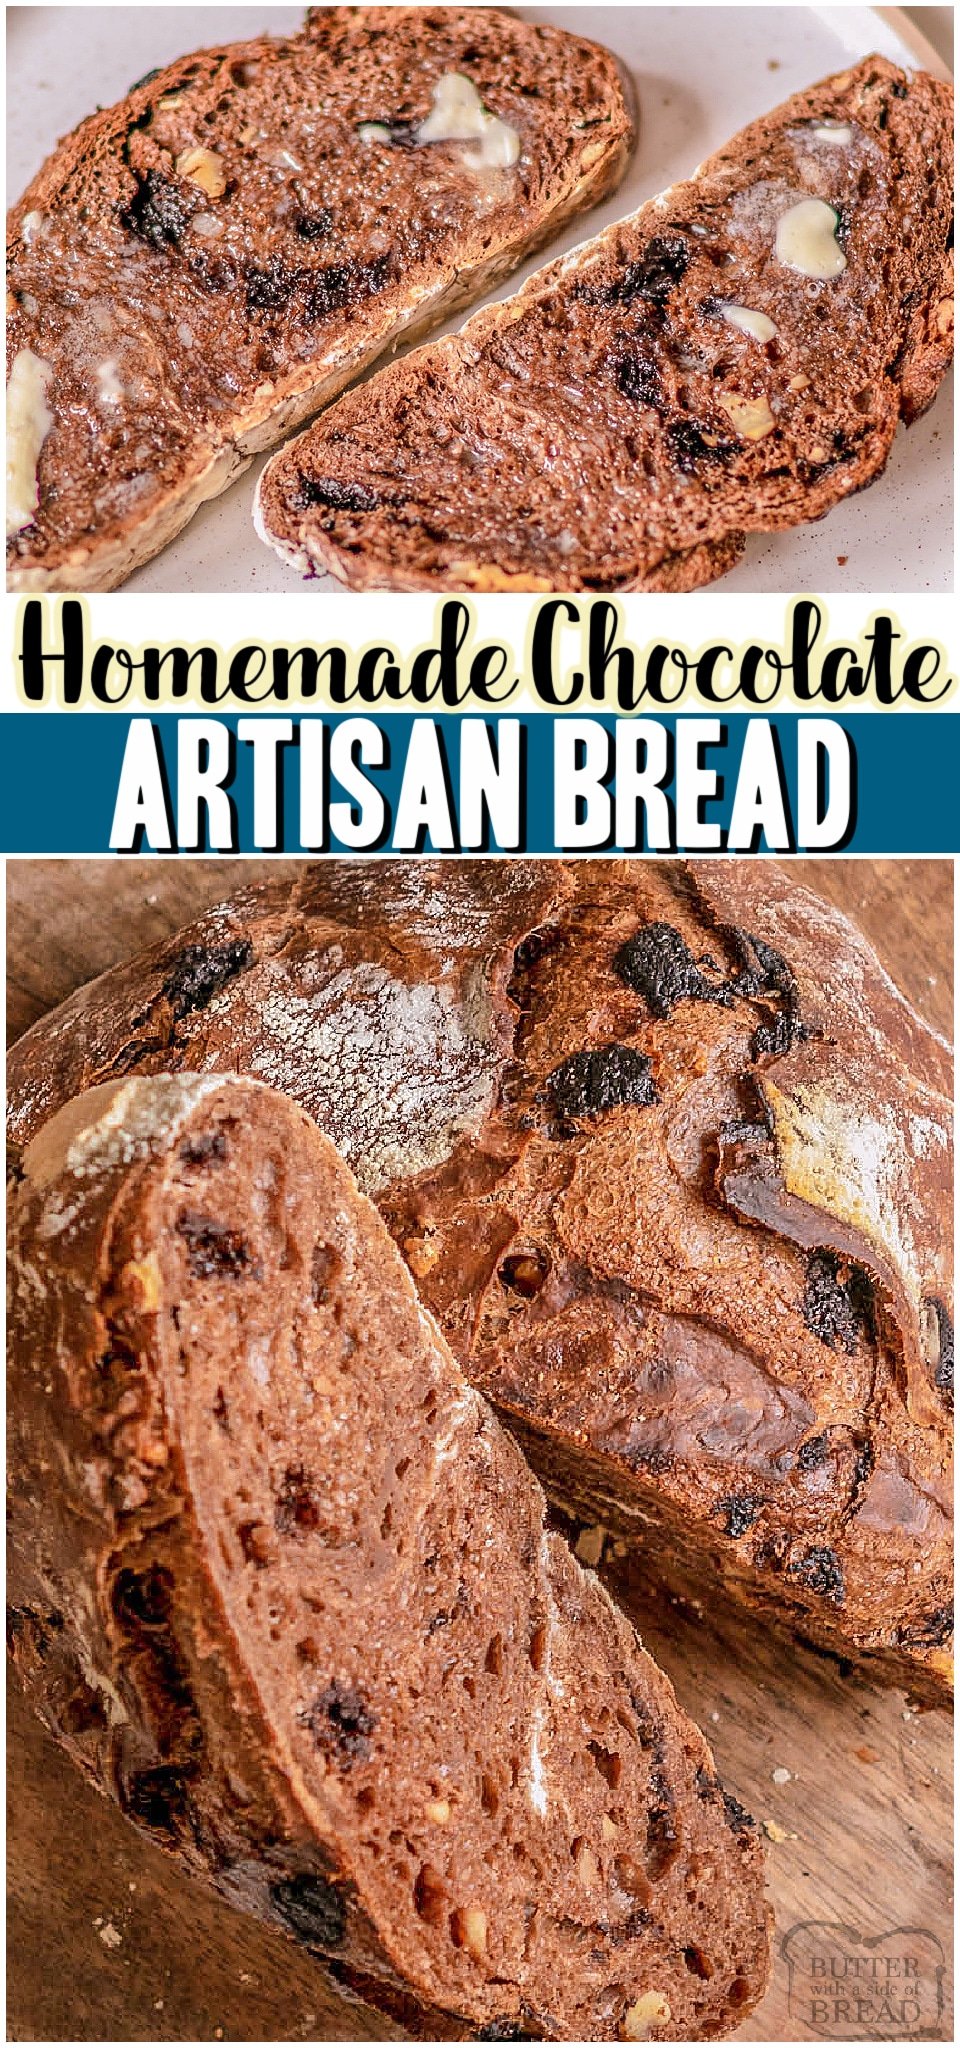 No-Knead Chocolate Artisan Bread is an easy to make crusty bread recipe that packs chocolate flavor into every chewy bite. With cocoa powder and chopped dark chocolate, this easy artisan bread is a delicious treat!